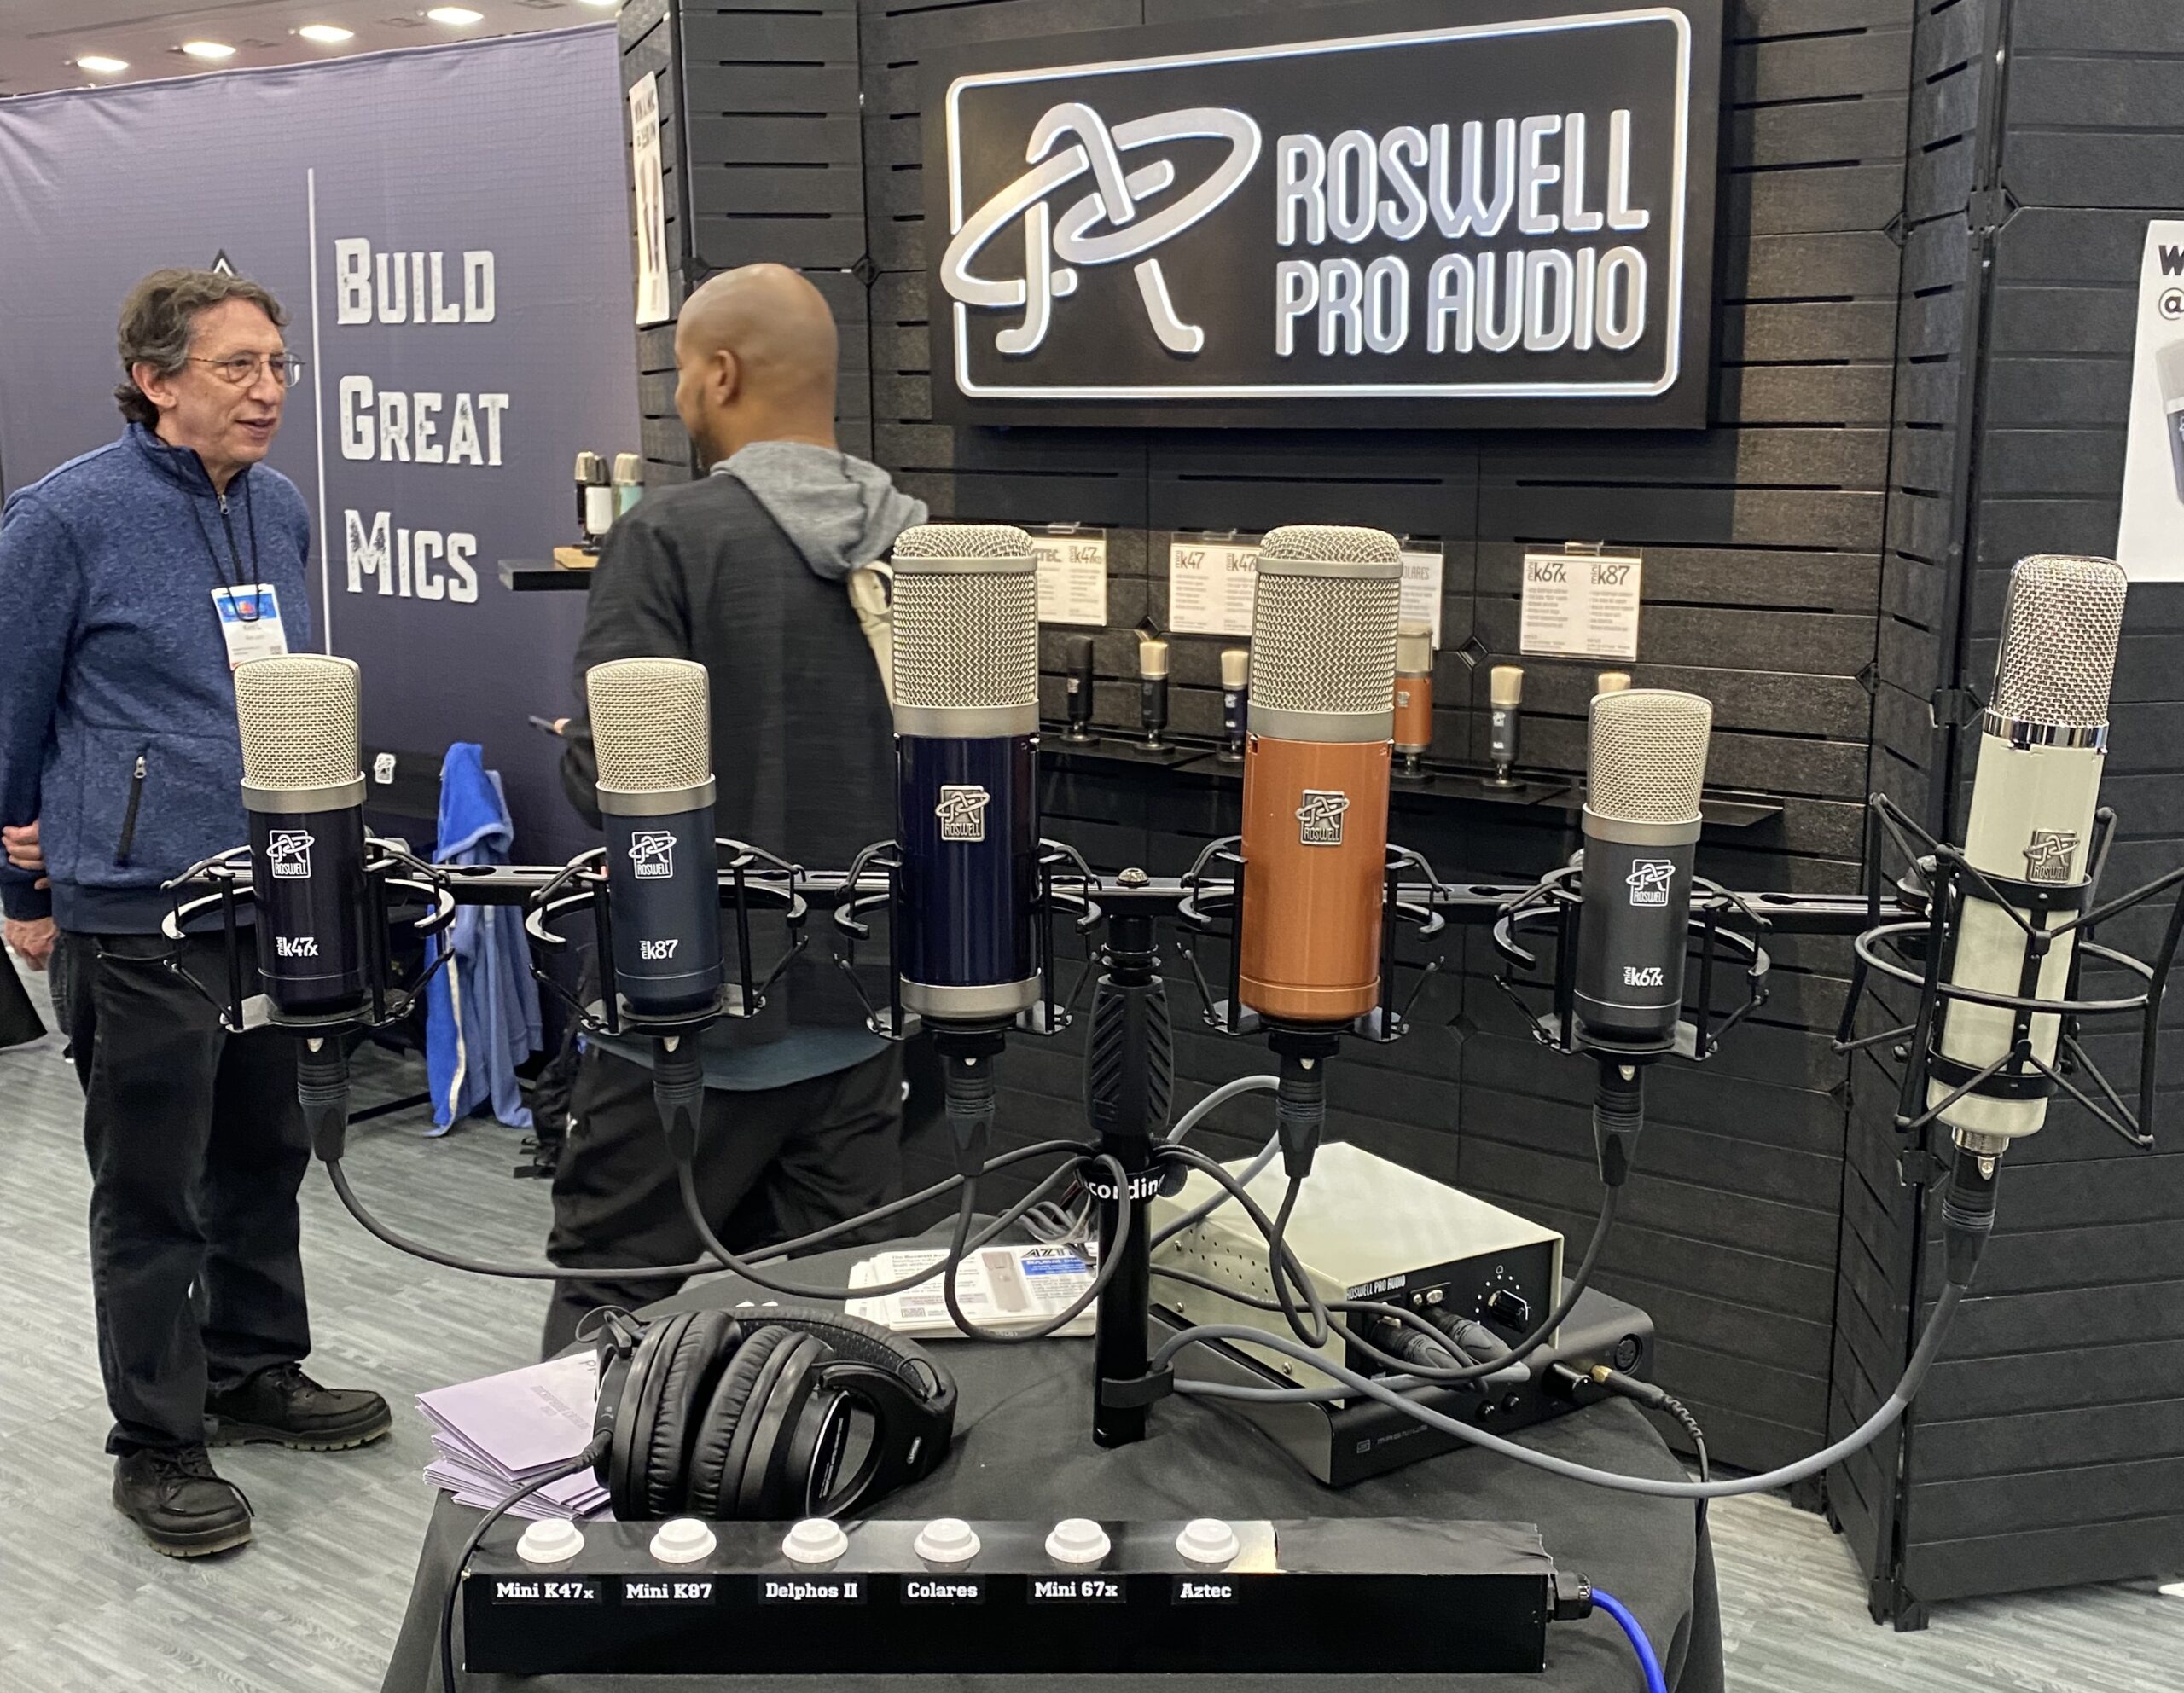 It's push to play at the Roswell Pro Audio booth.